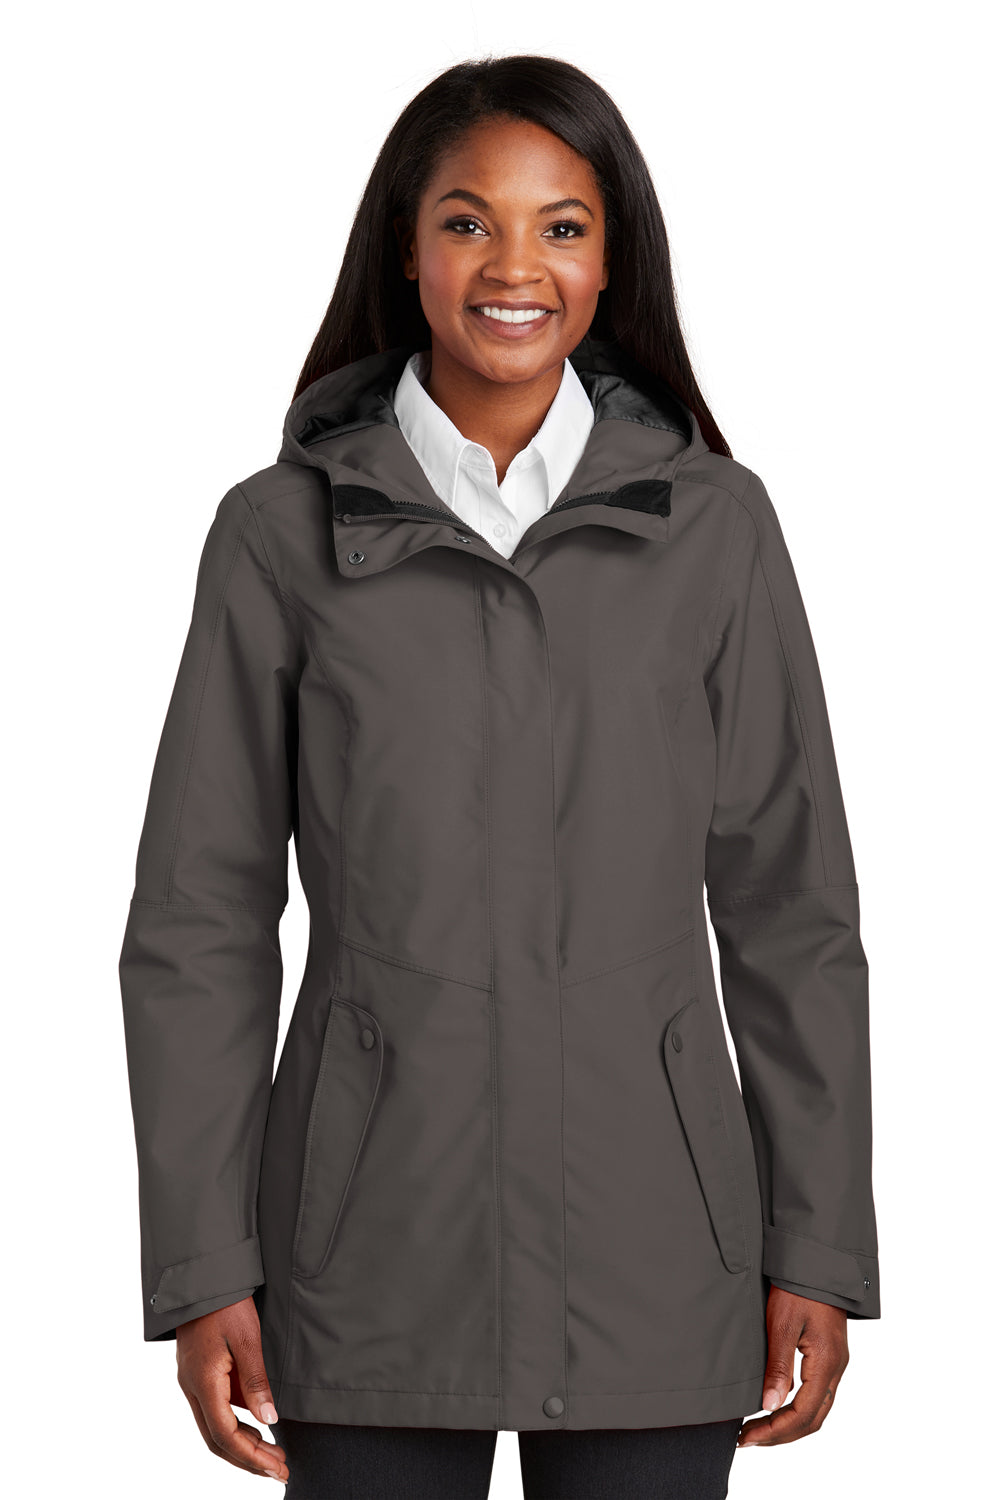 Port Authority L900 Womens Collective Waterproof Full Zip Hooded Jacket Graphite Grey Front